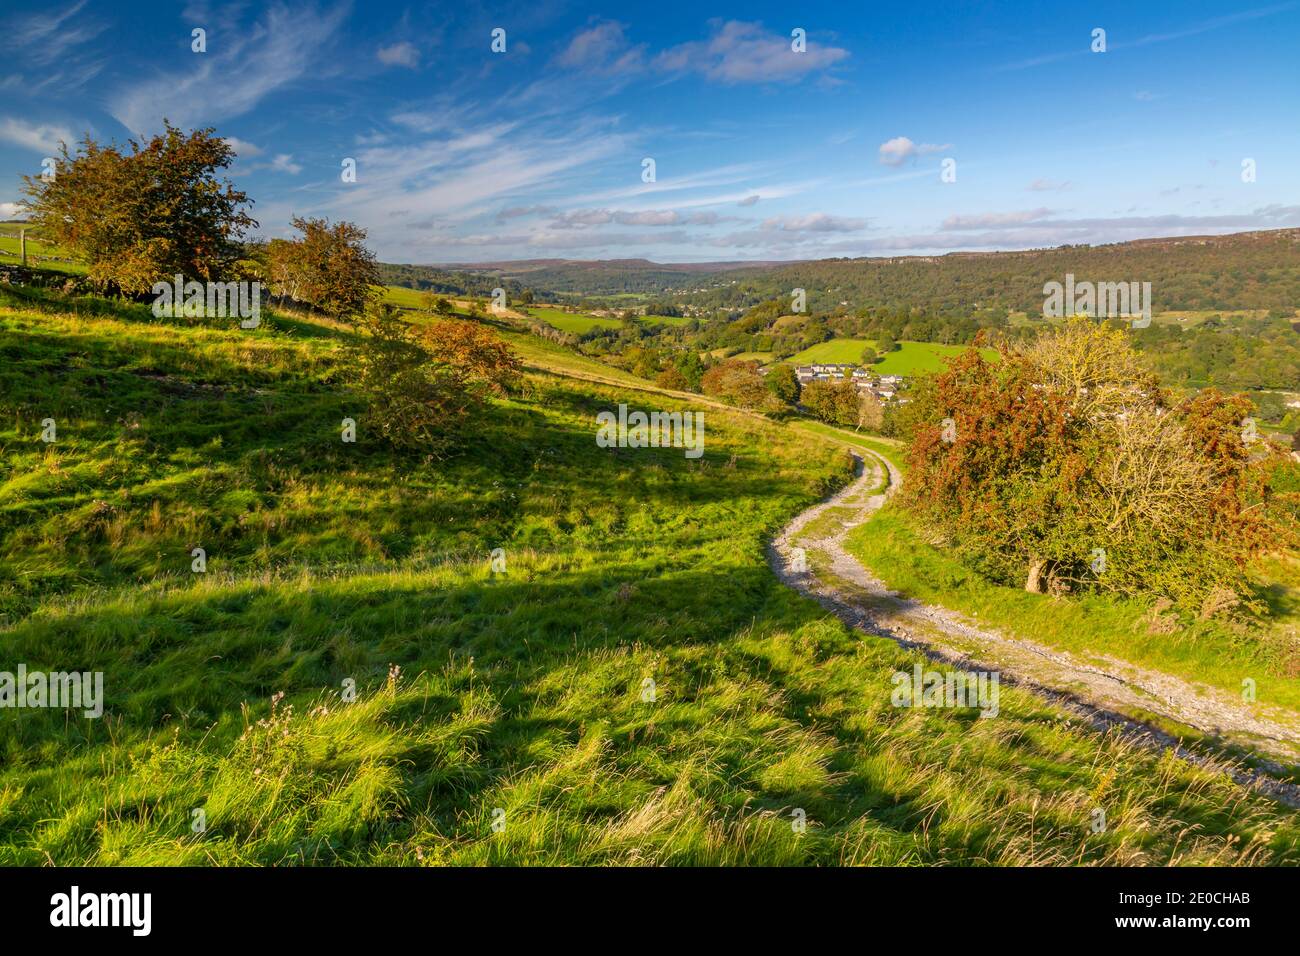 View of track leading to Calver Village overlooked by Curbar Edge, Calver, Derbyshire Peak District, Derbyshire, England, United Kingdom, Europe Stock Photo